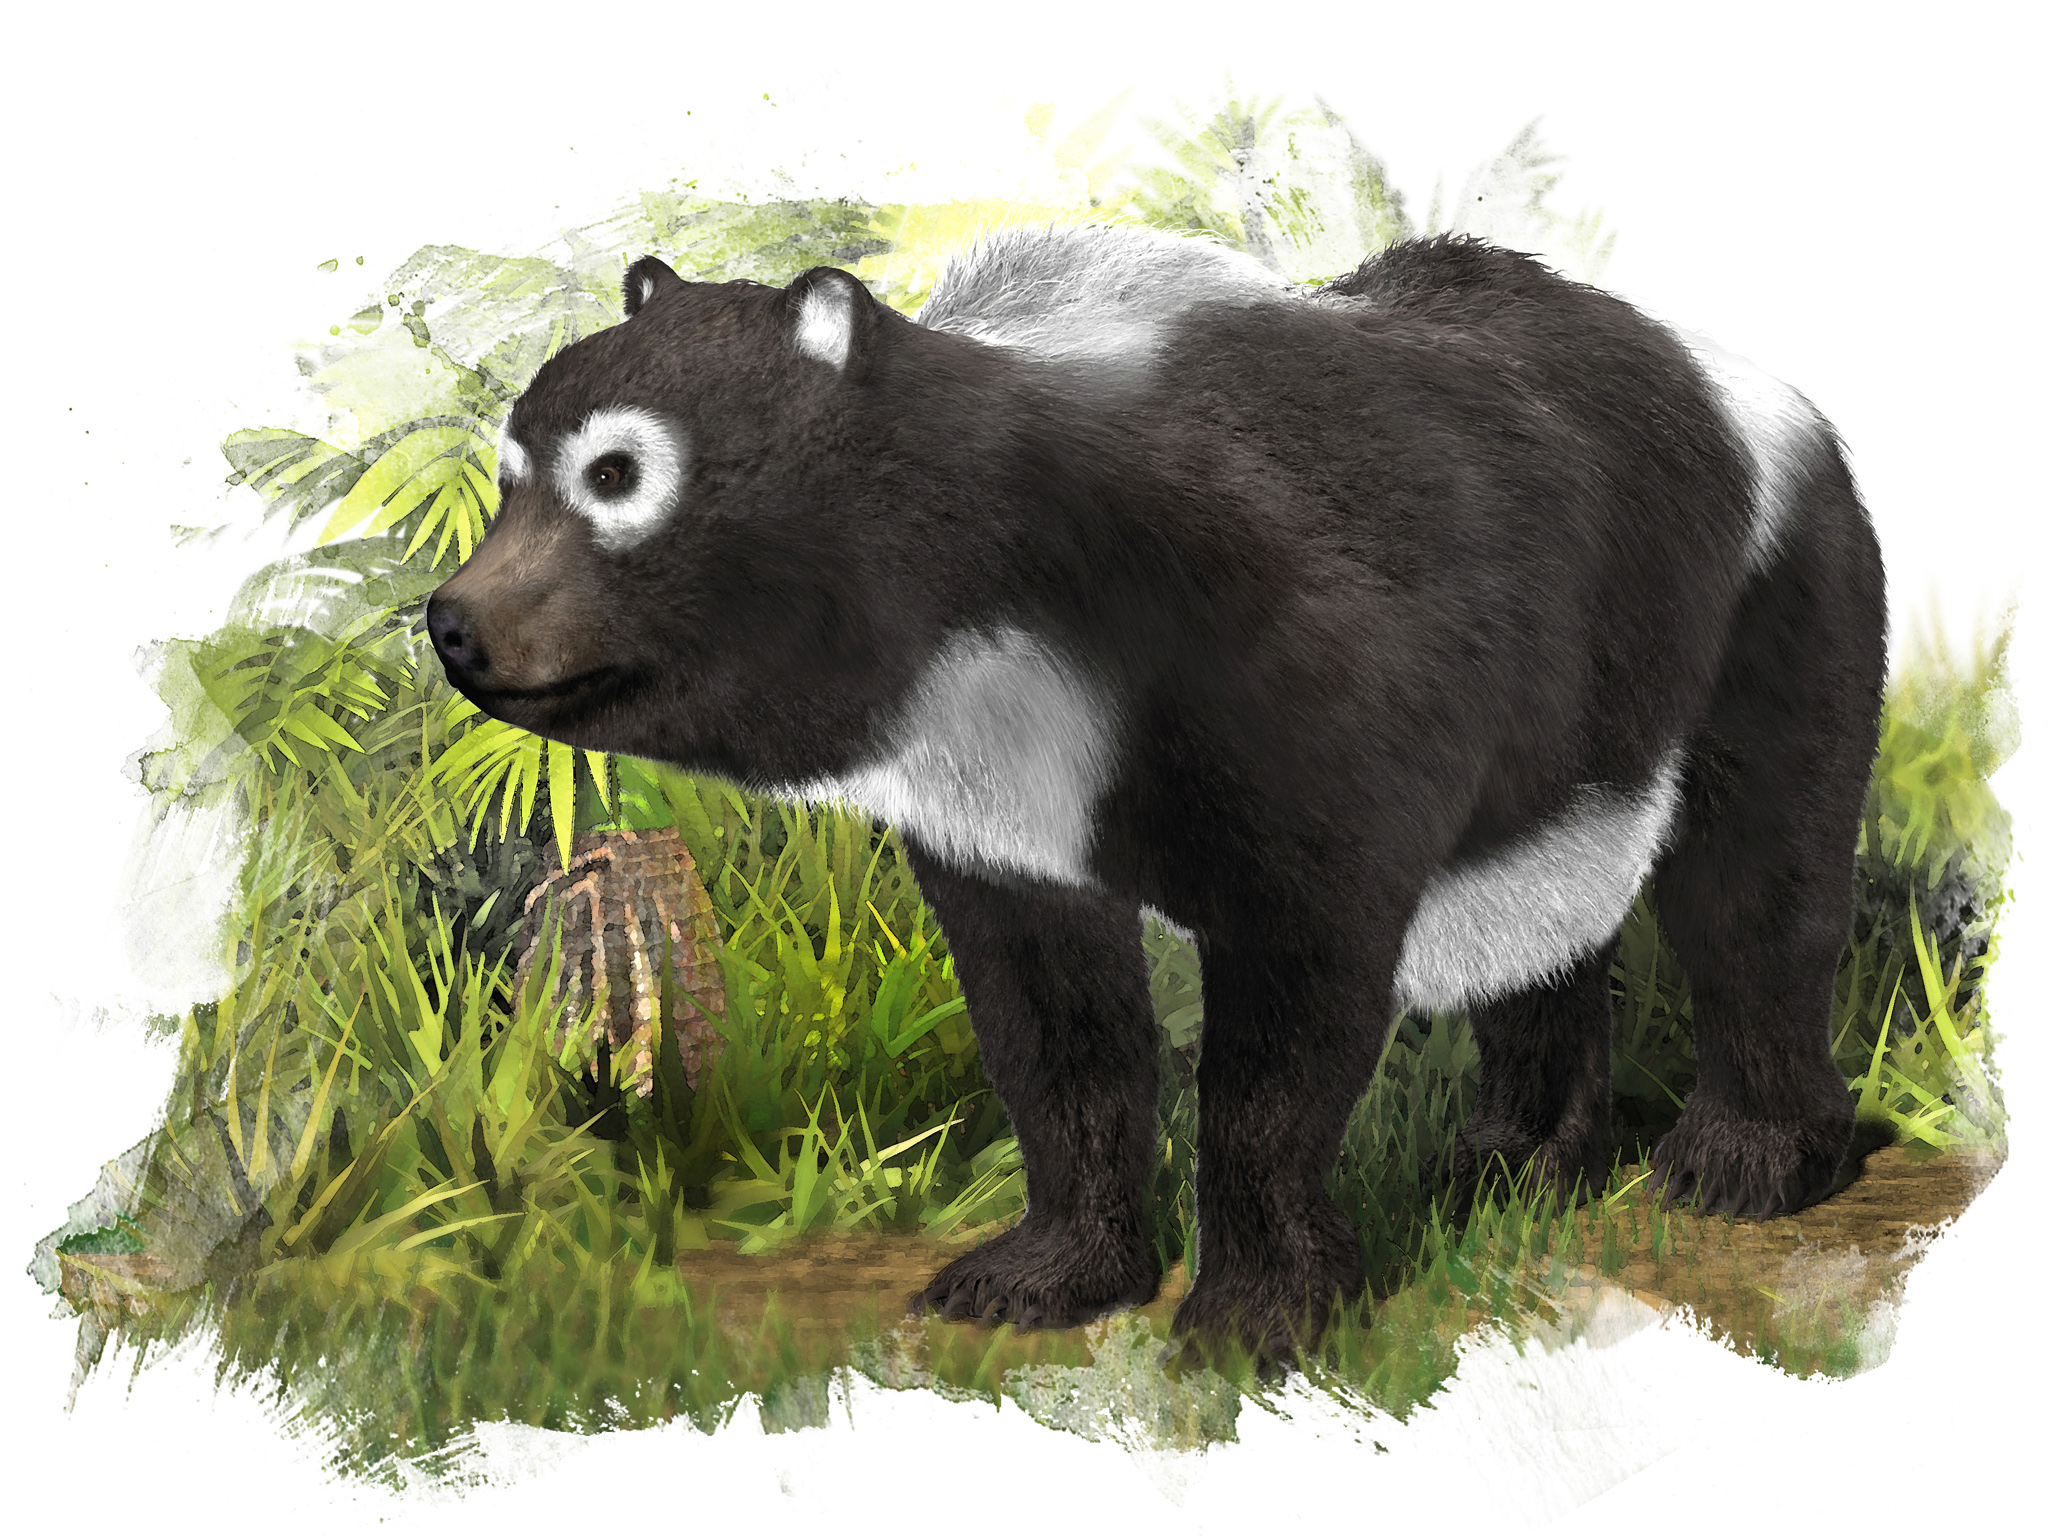 Oldest Giant Panda Relative Found in Spain